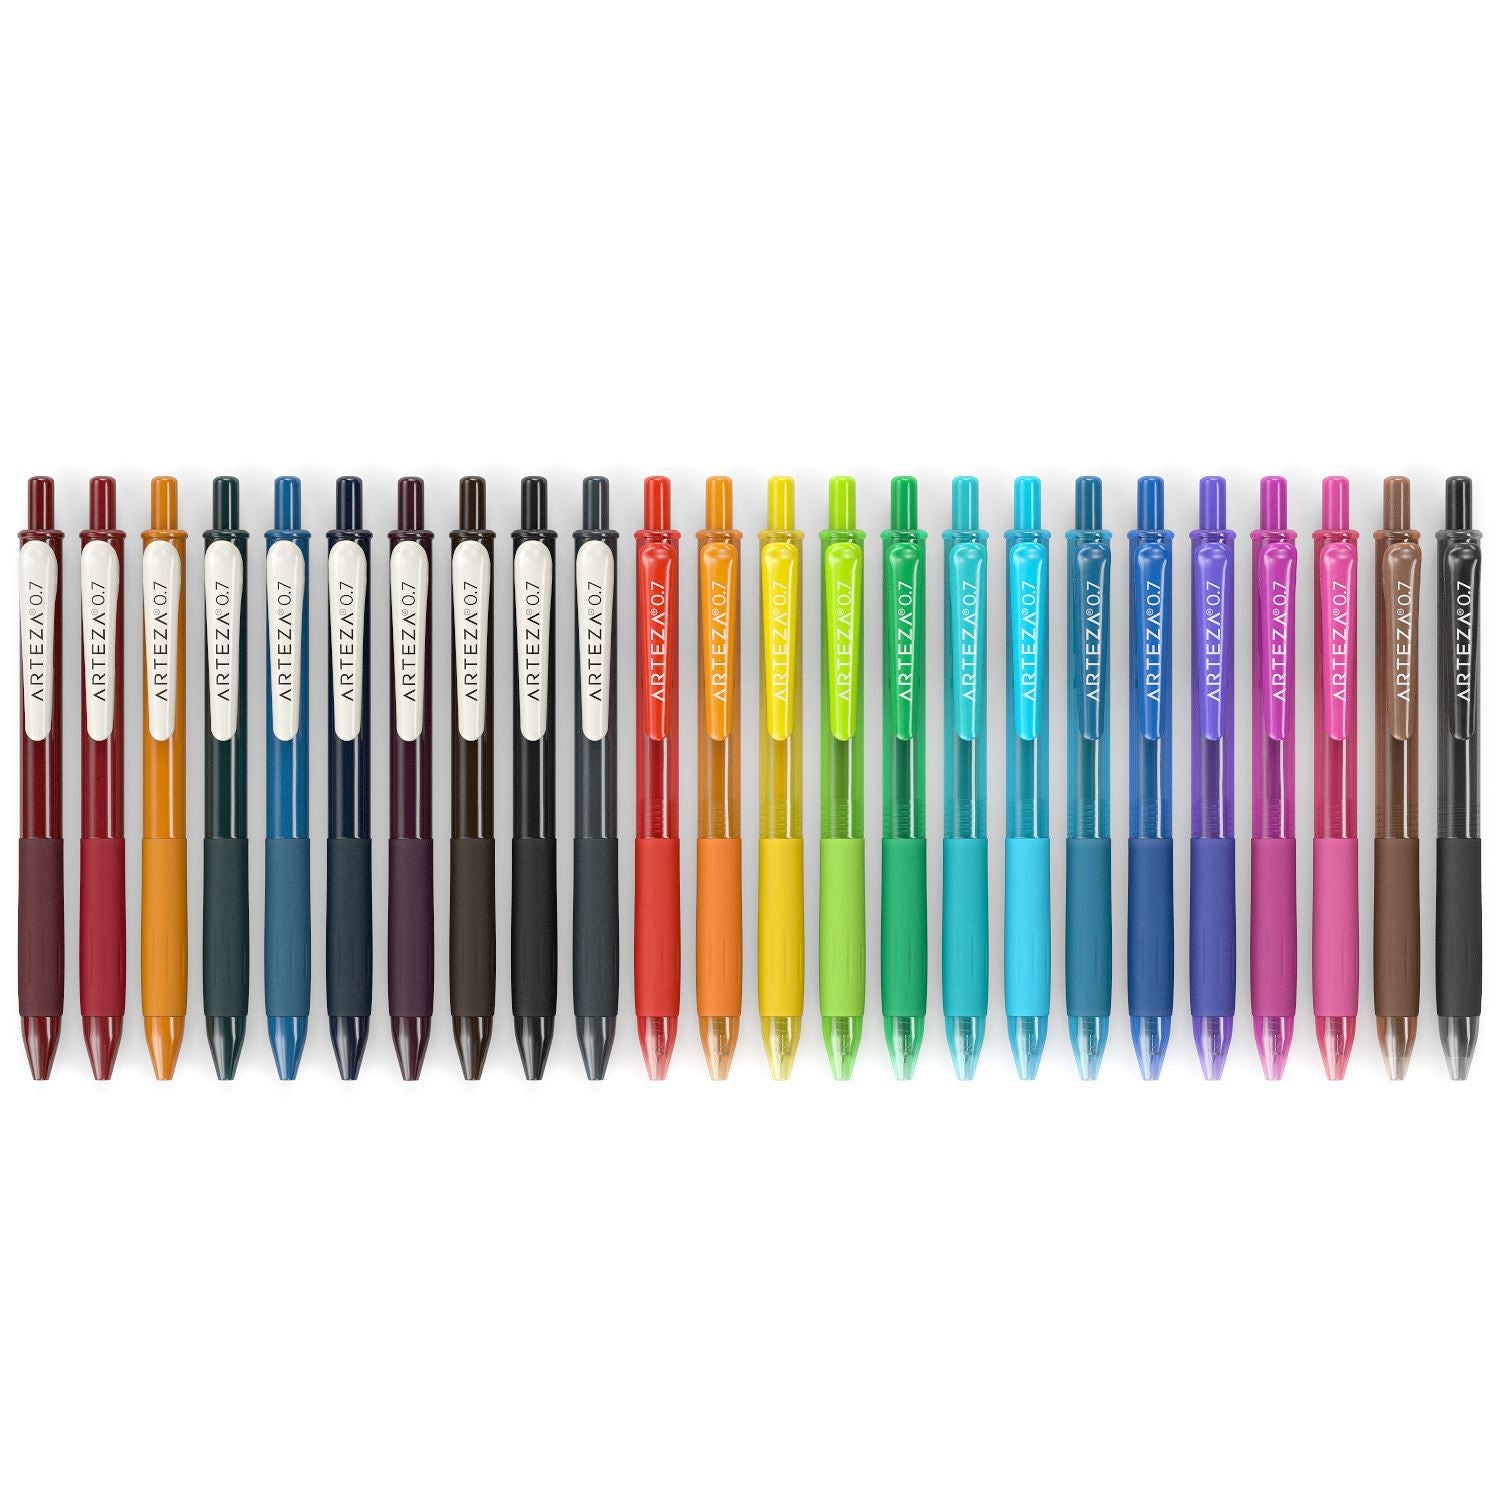 Photo: Colored Gel Pens - Vertical by Photo Market